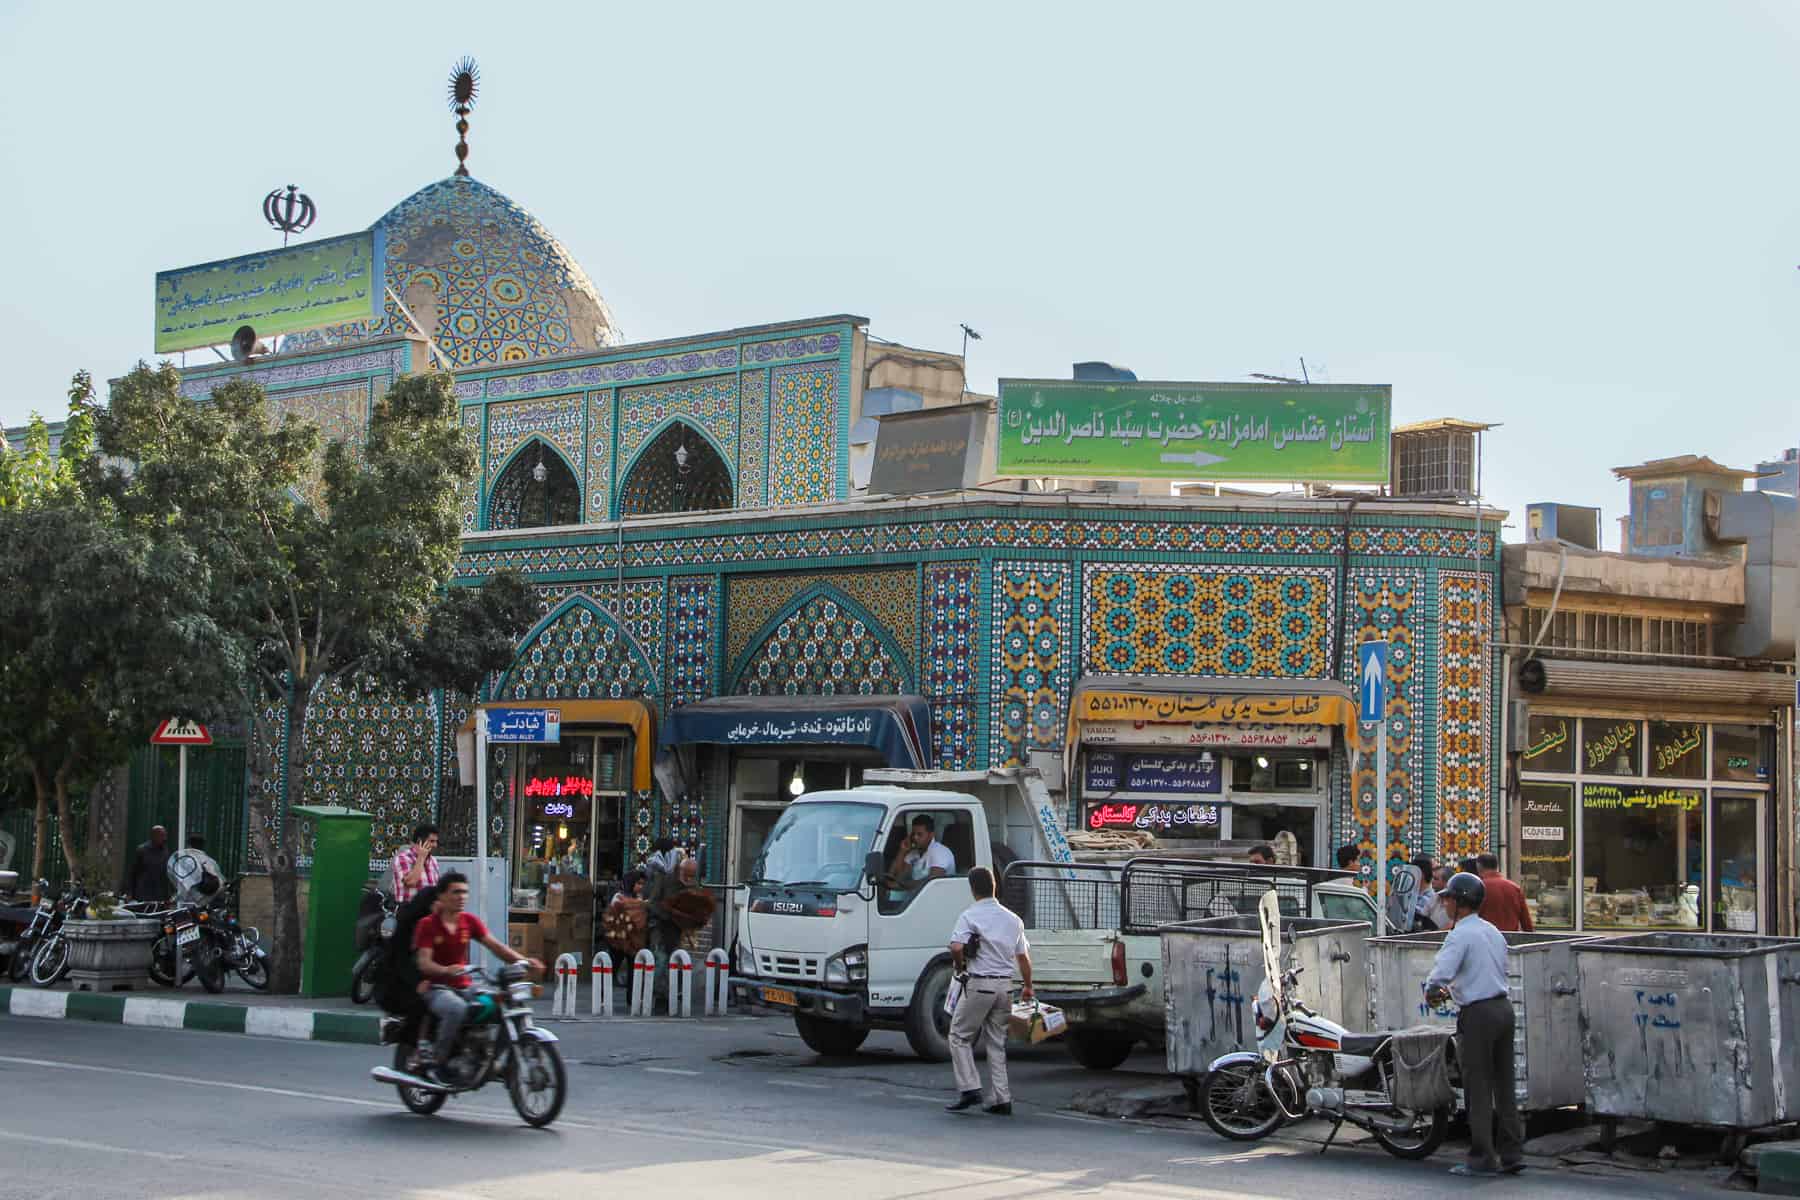 A street scene in Iran showing people and traffic outside a blue and yellow mosaic covered building and dome. 